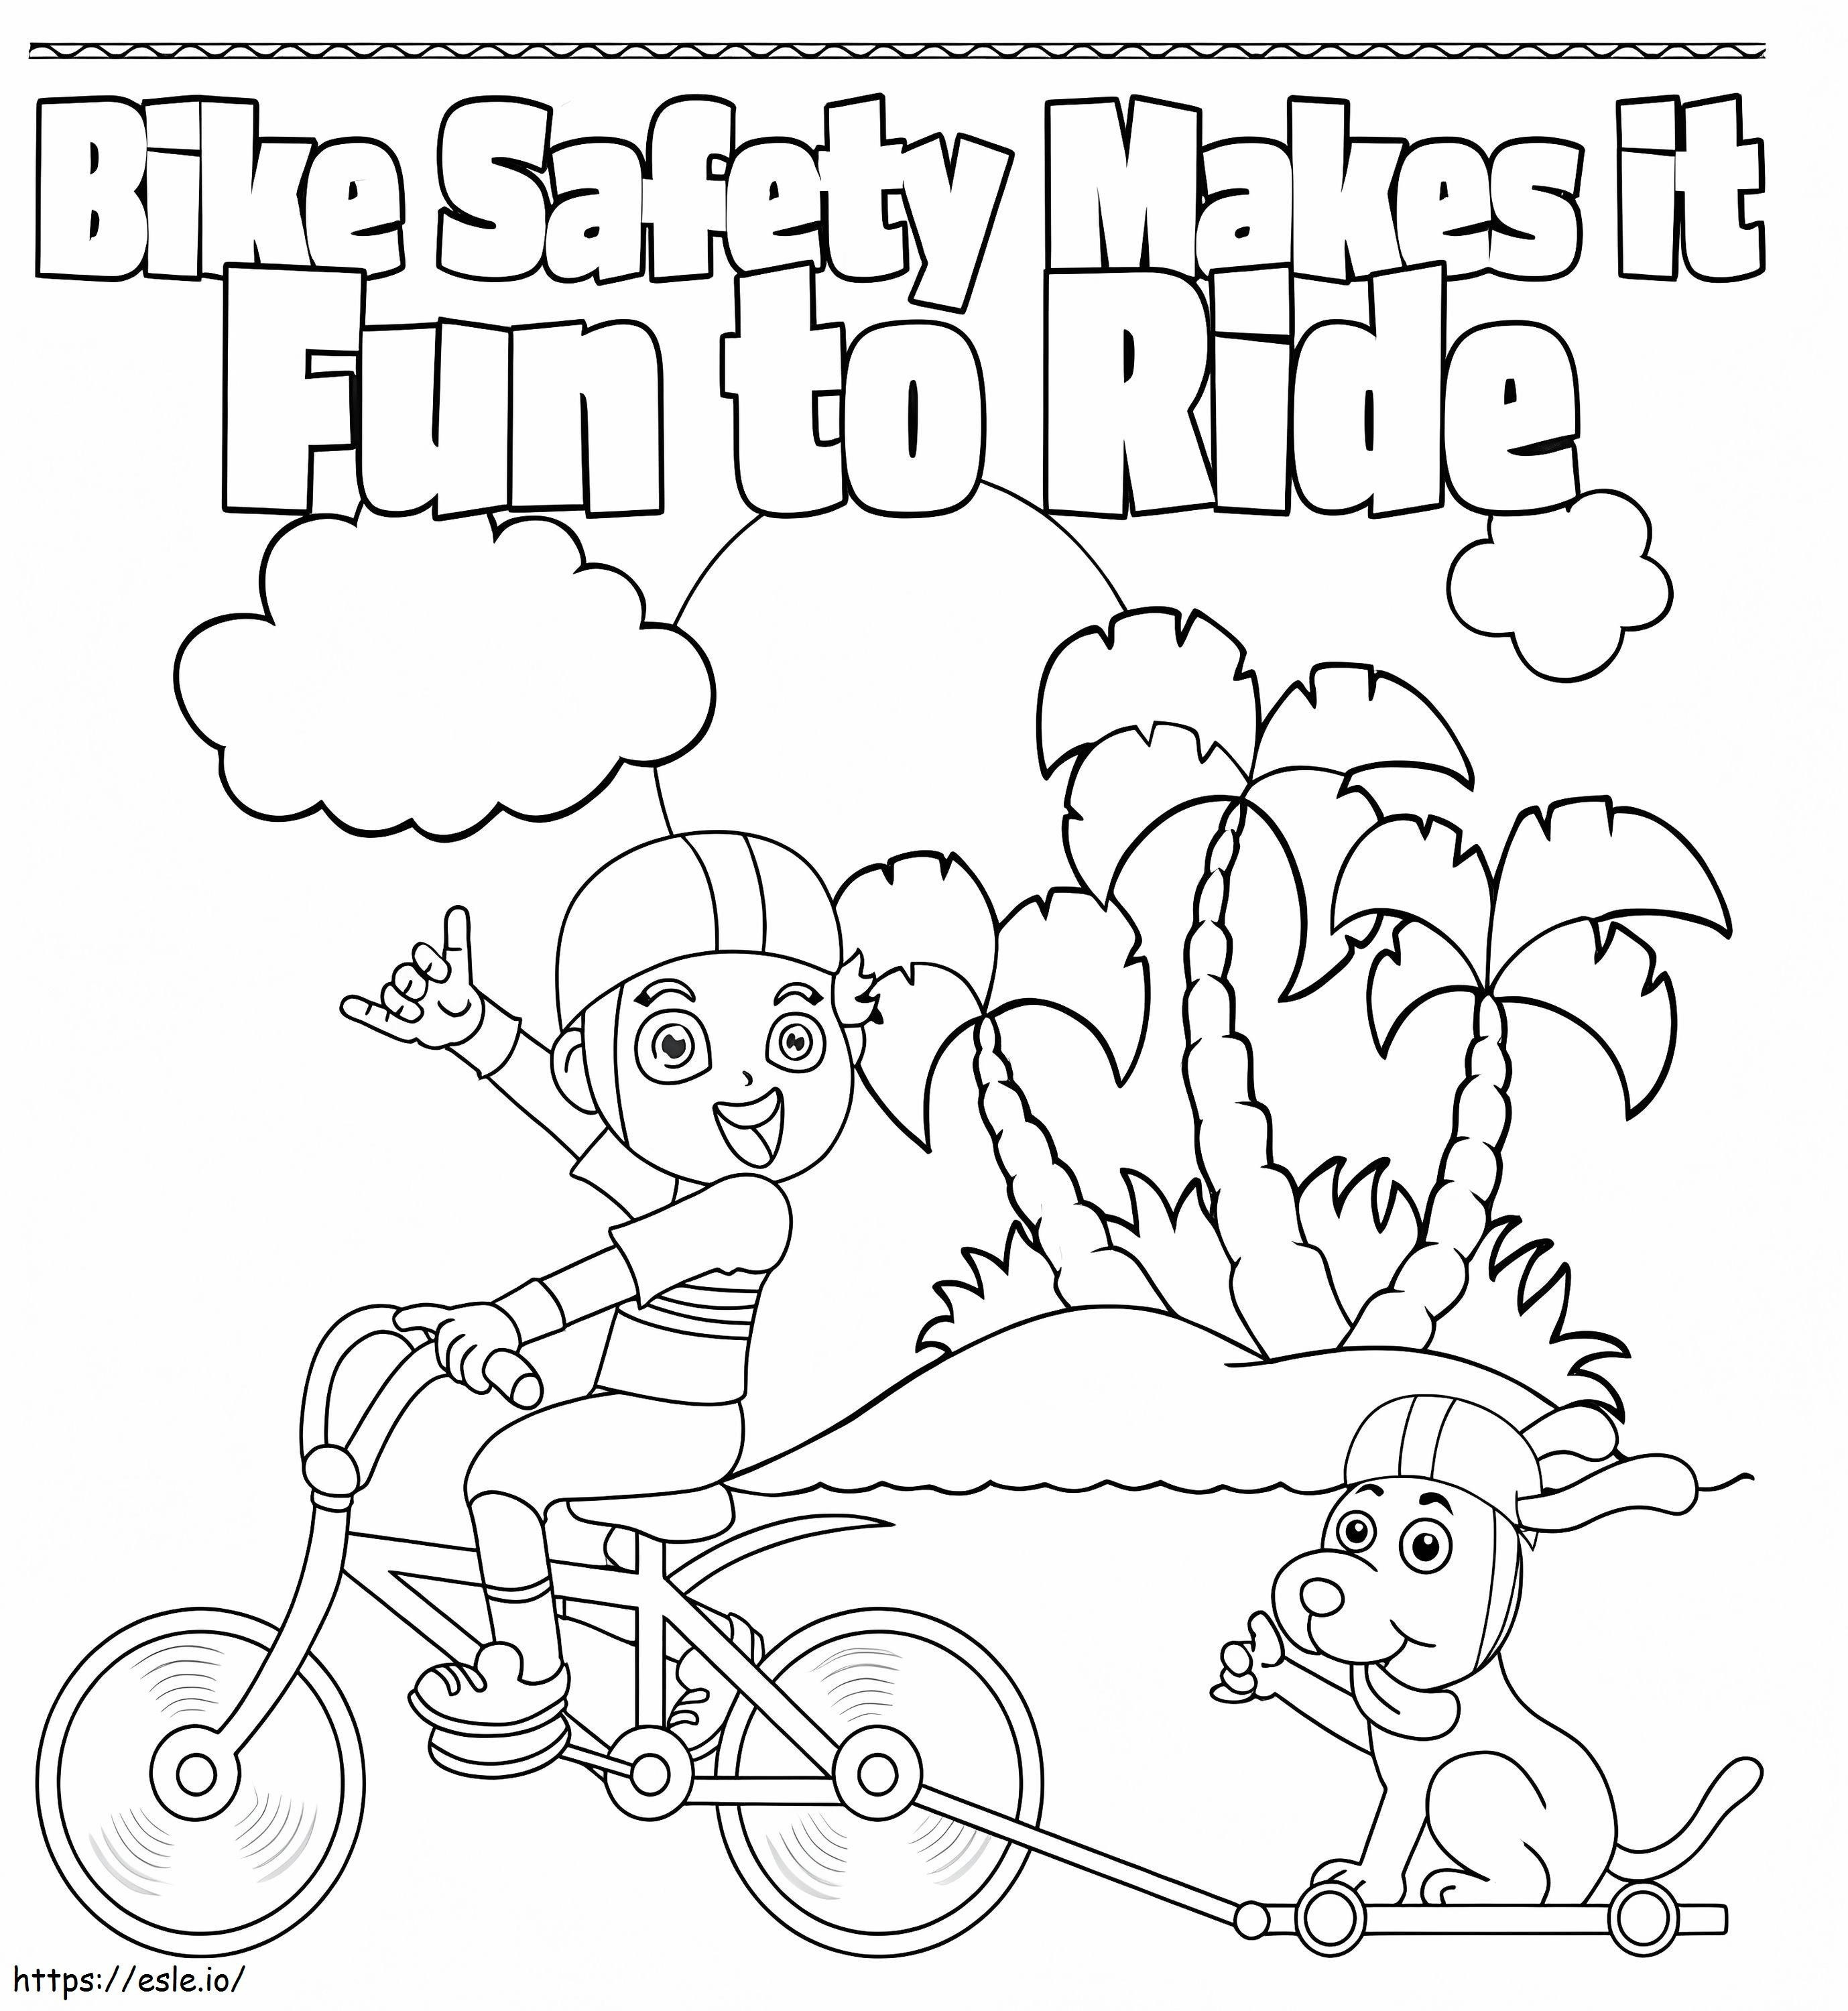 Free Printable Bicycle Safety coloring page